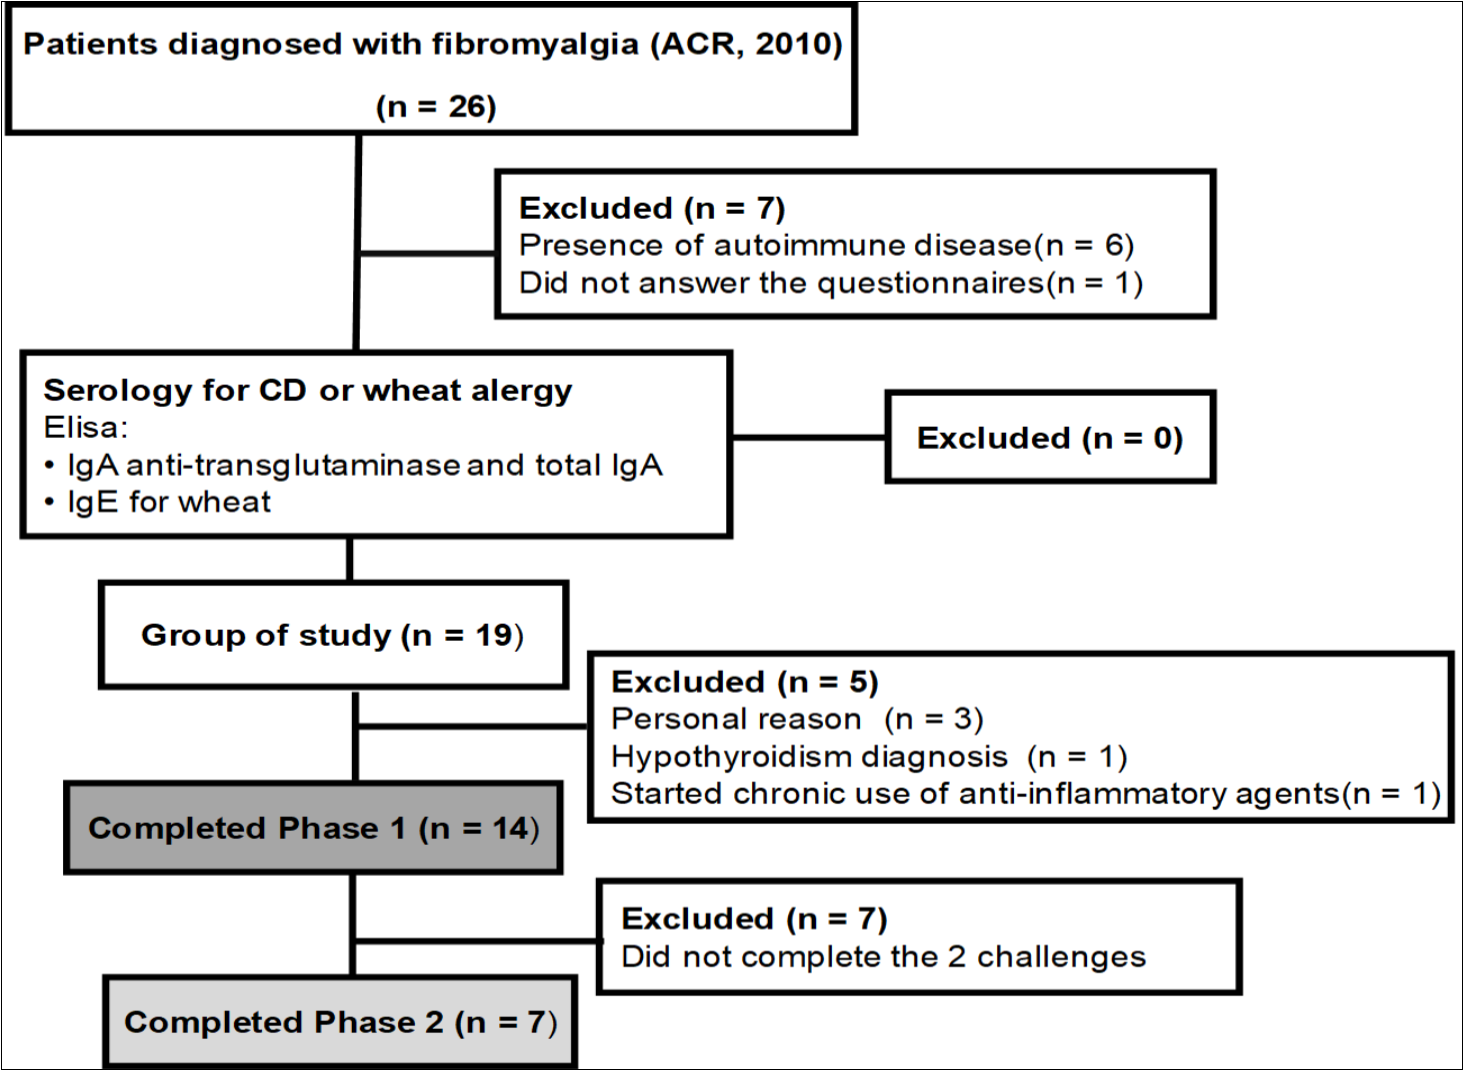  Flow of patient recruitment and exclusion during the study. Abbreviations: ACR, American college of rheumatology; CD, celiac disease. Phase 1: Gluten-free period; Phase 2: Food challenge.